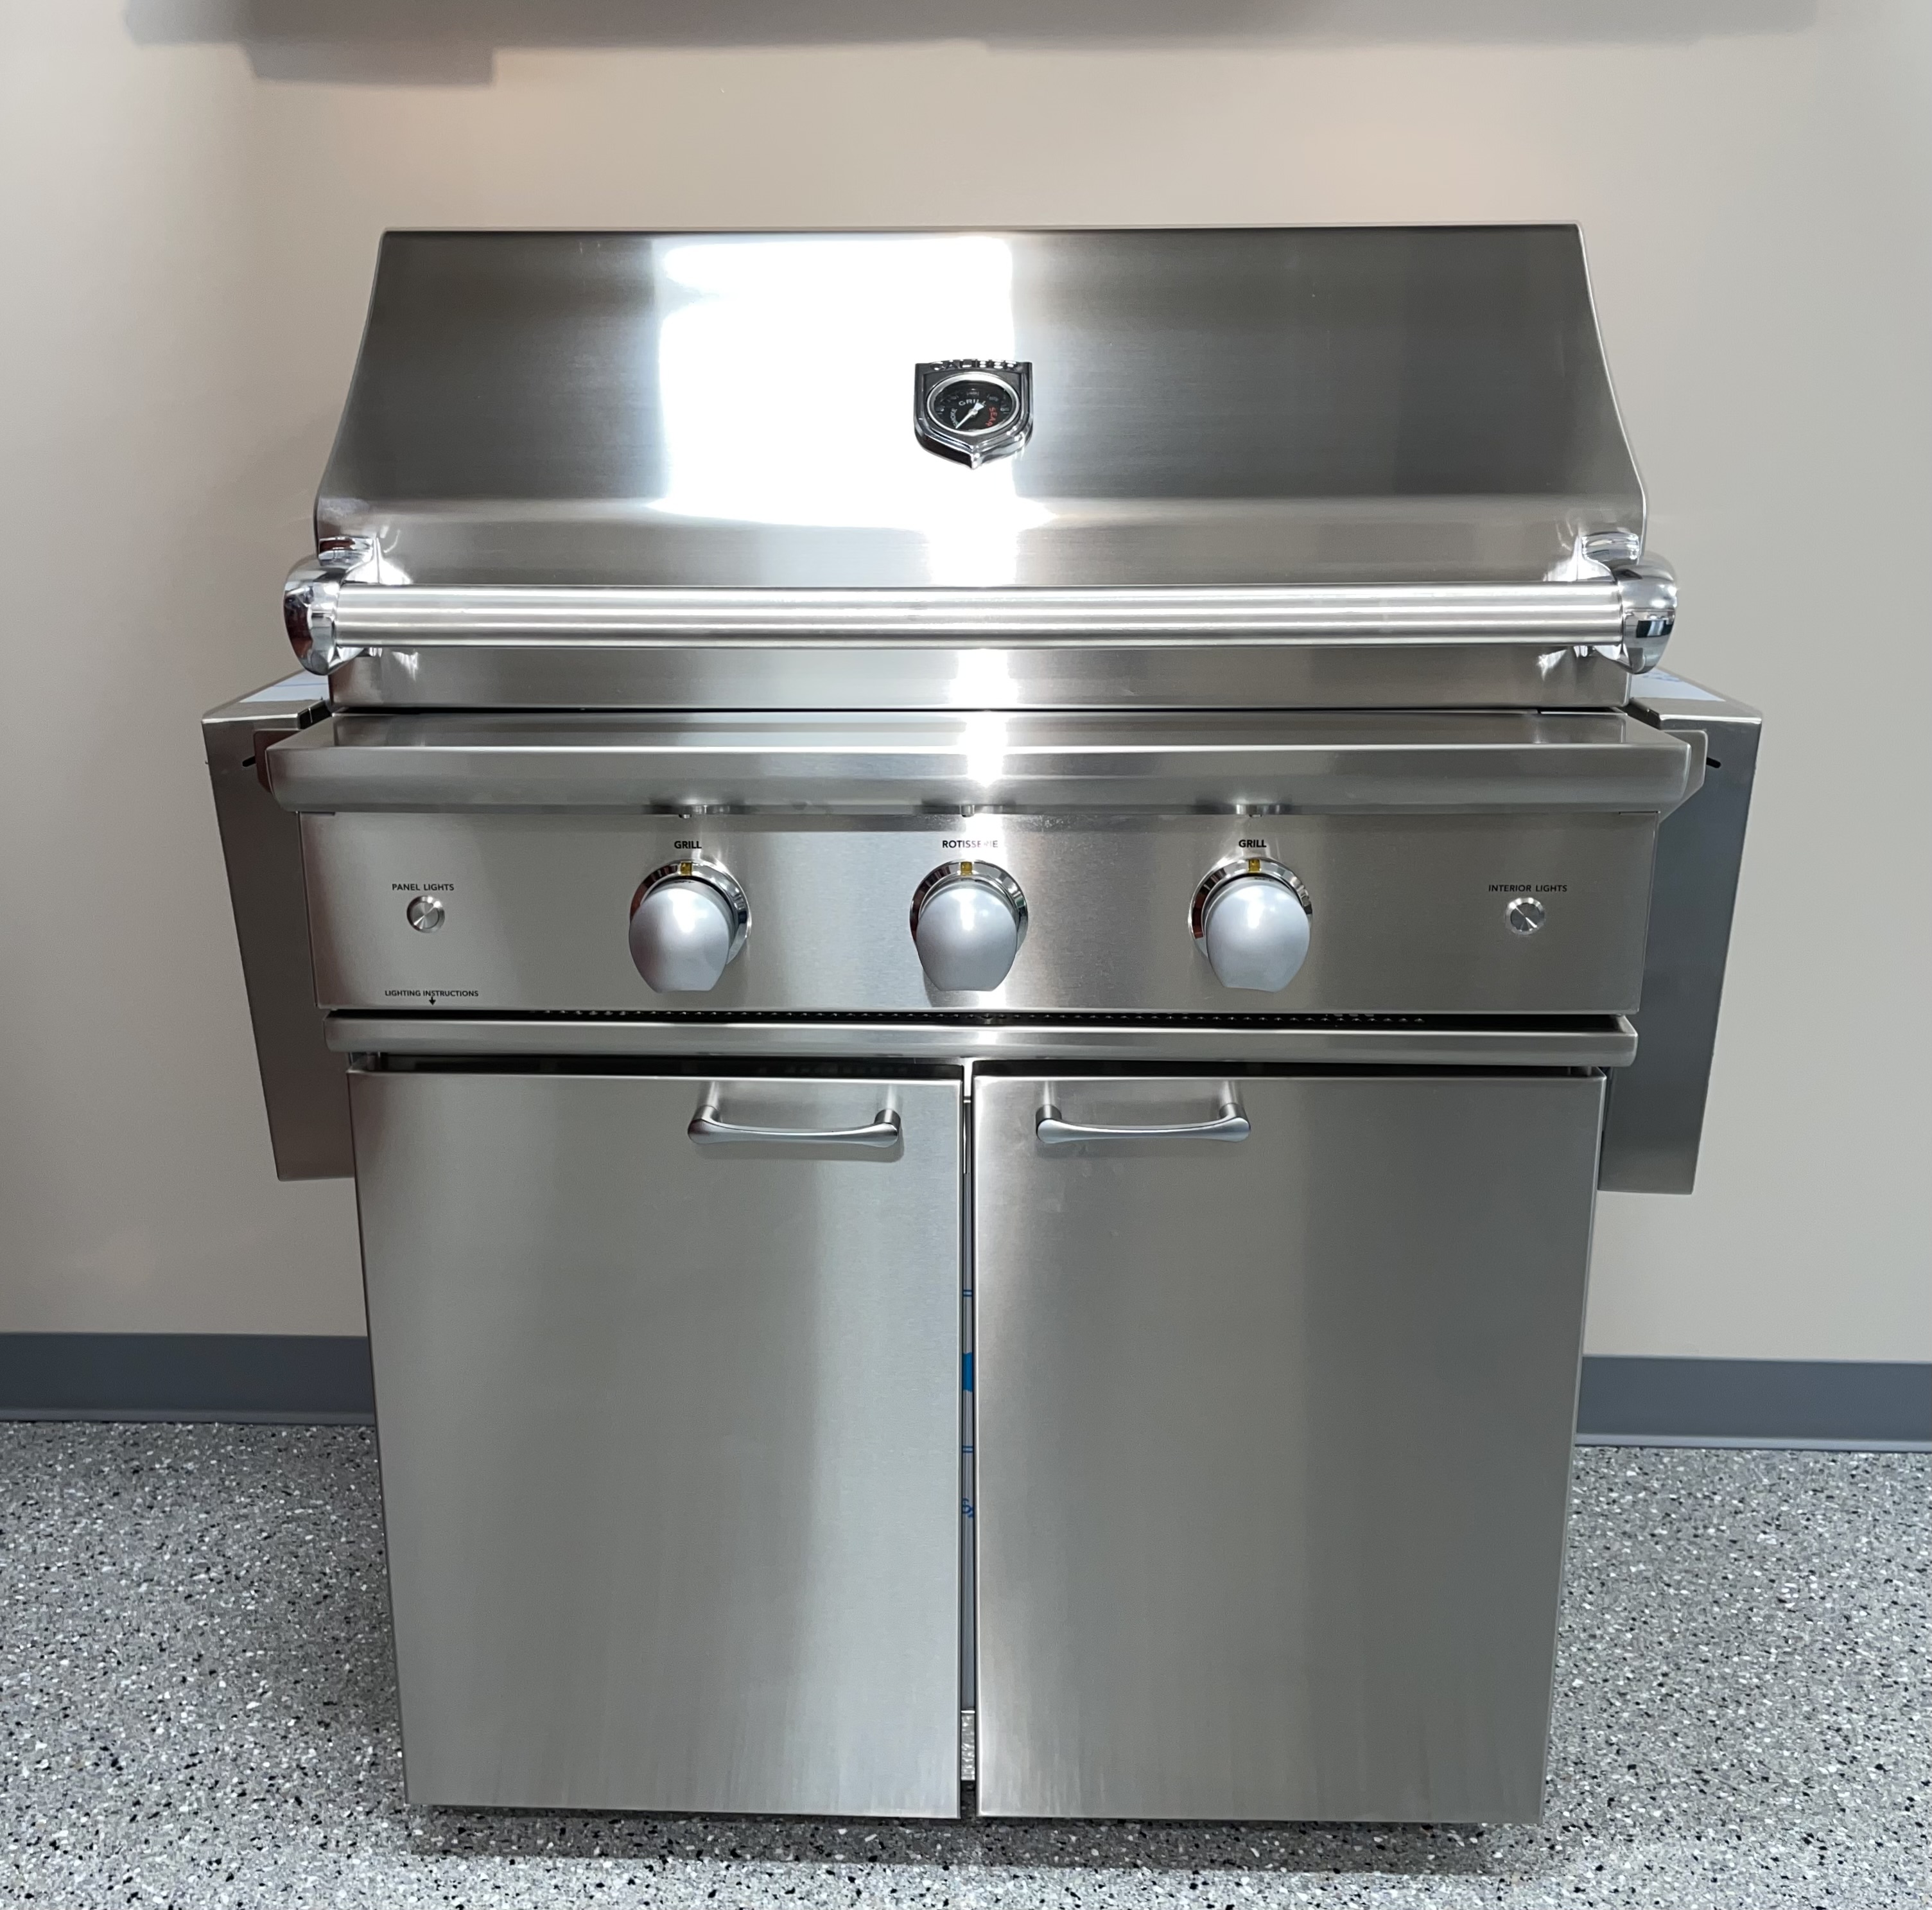 Caliber Appliances | Expect Great Heat | Crossflame Silver | Outdoor Grill | shadyoakdist.com